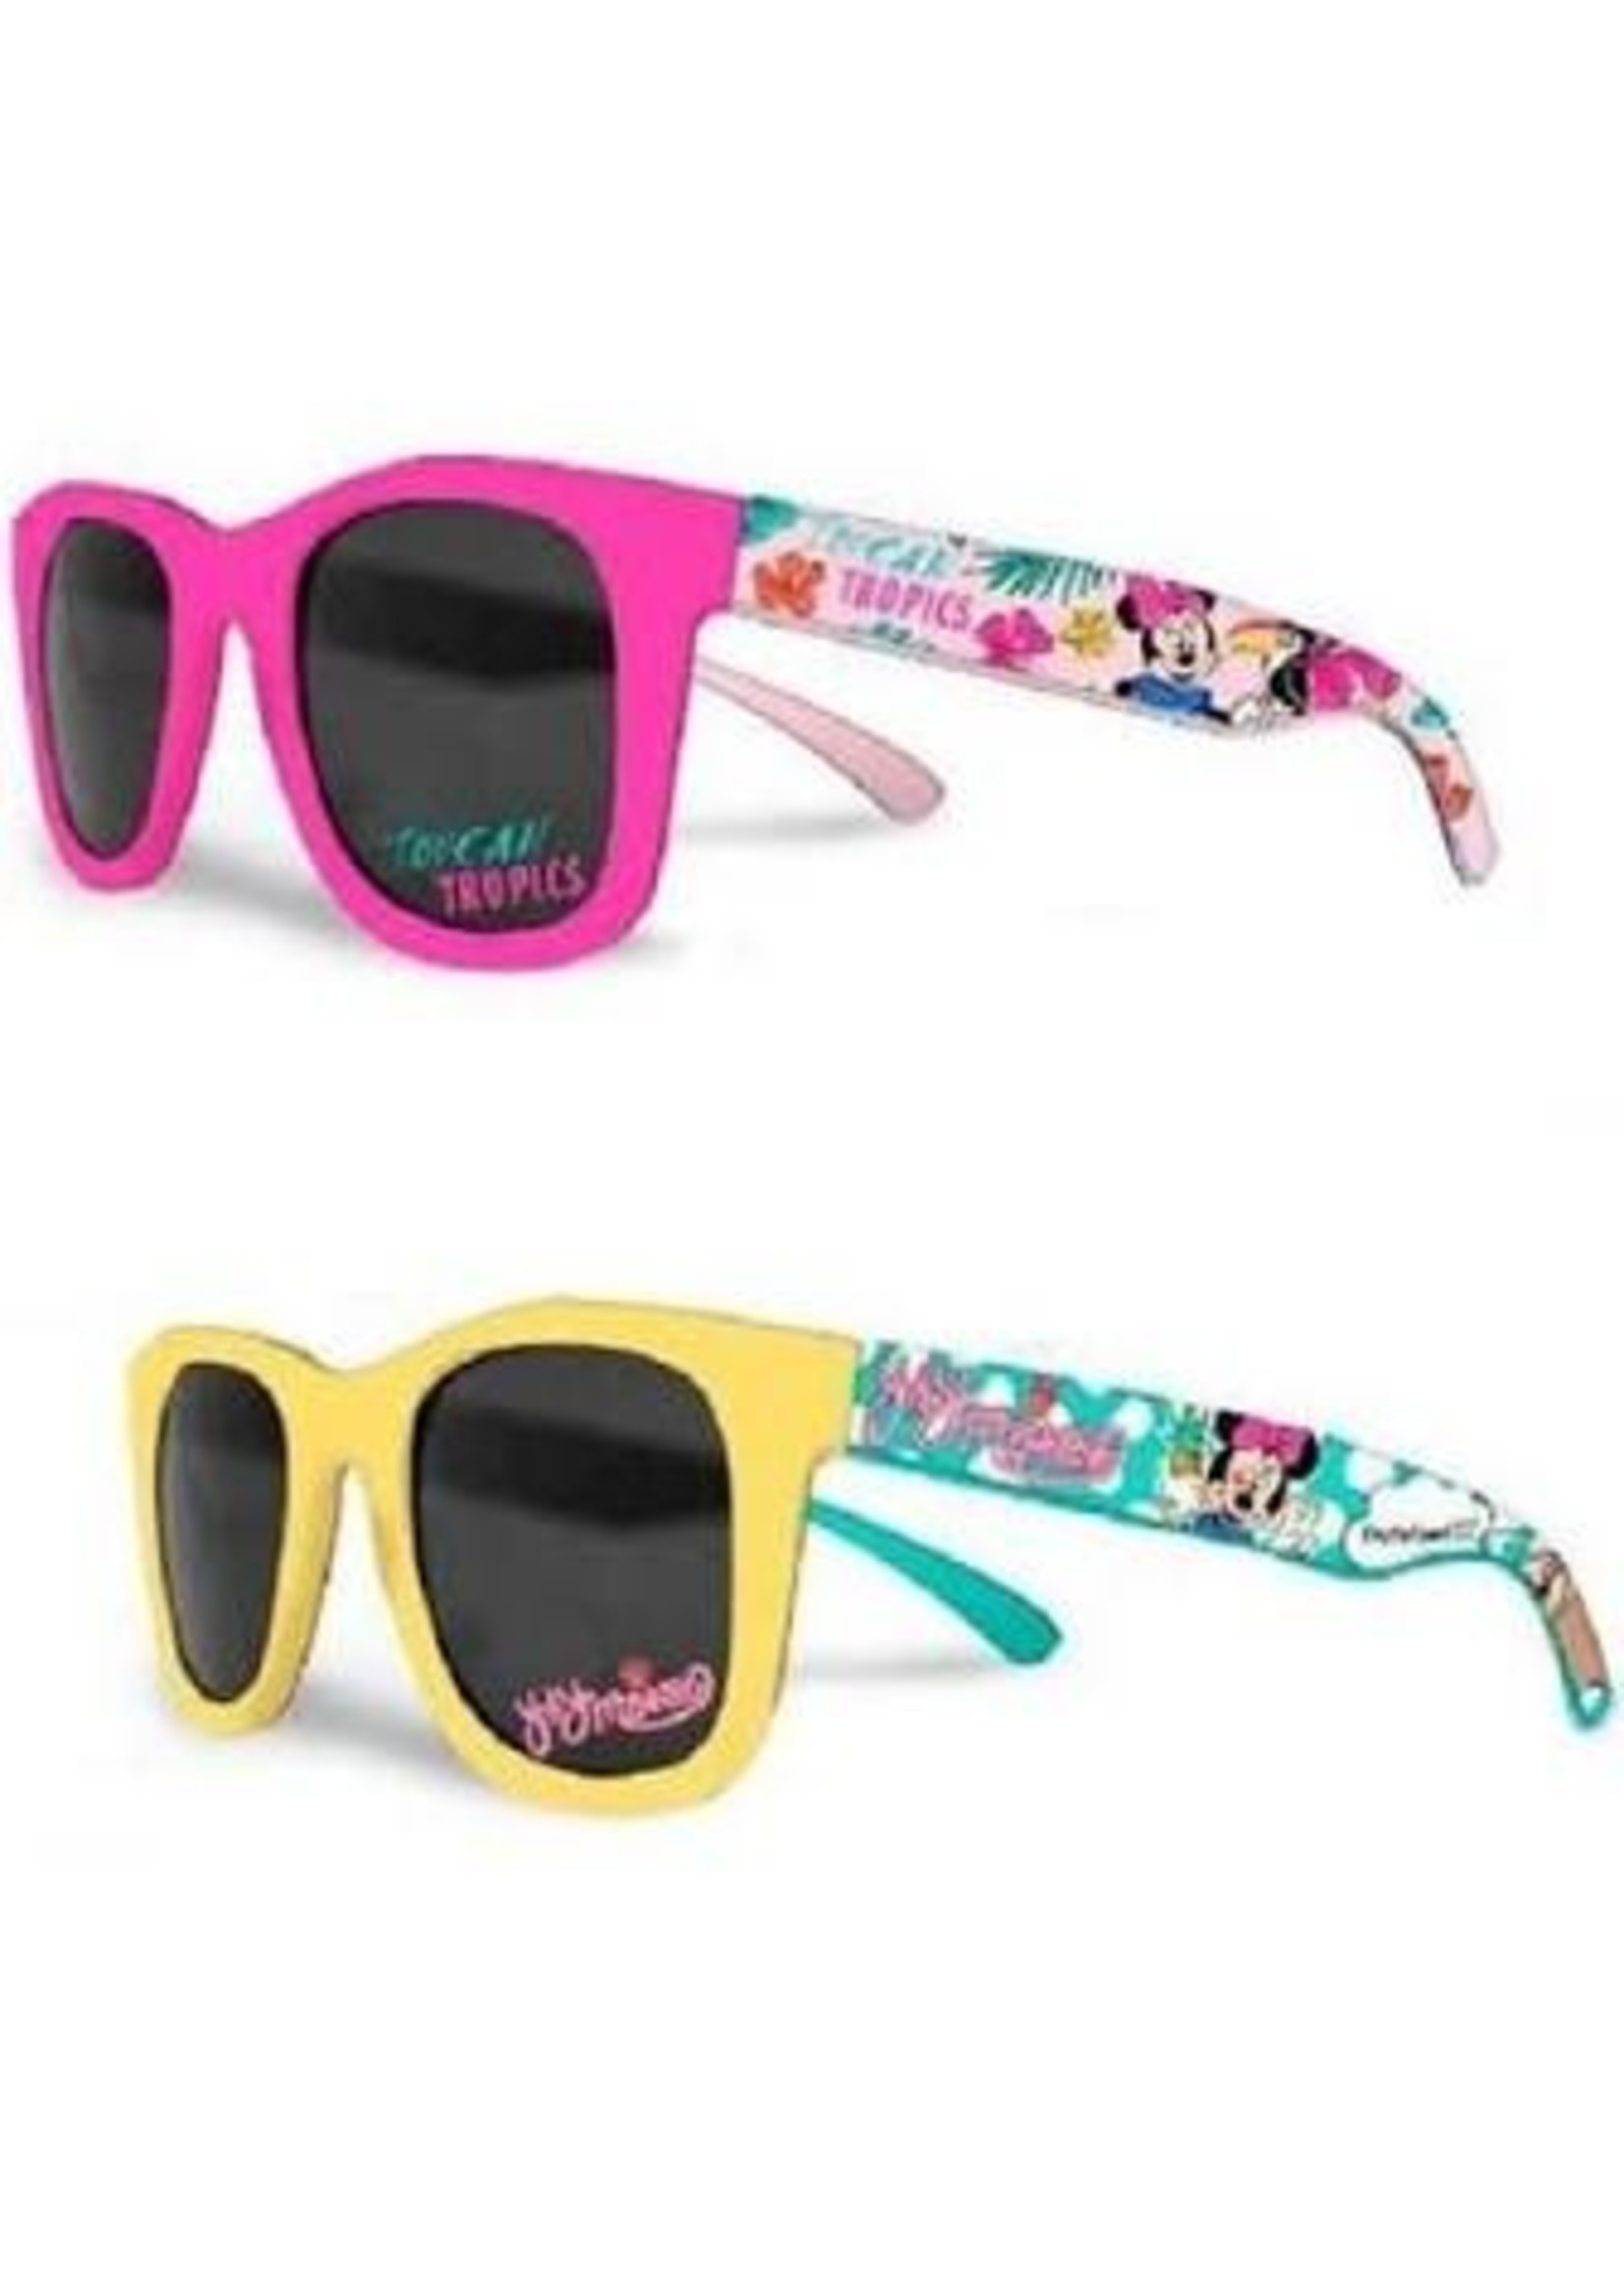 Disney Minnie Mouse sunglasses from Disney yellow